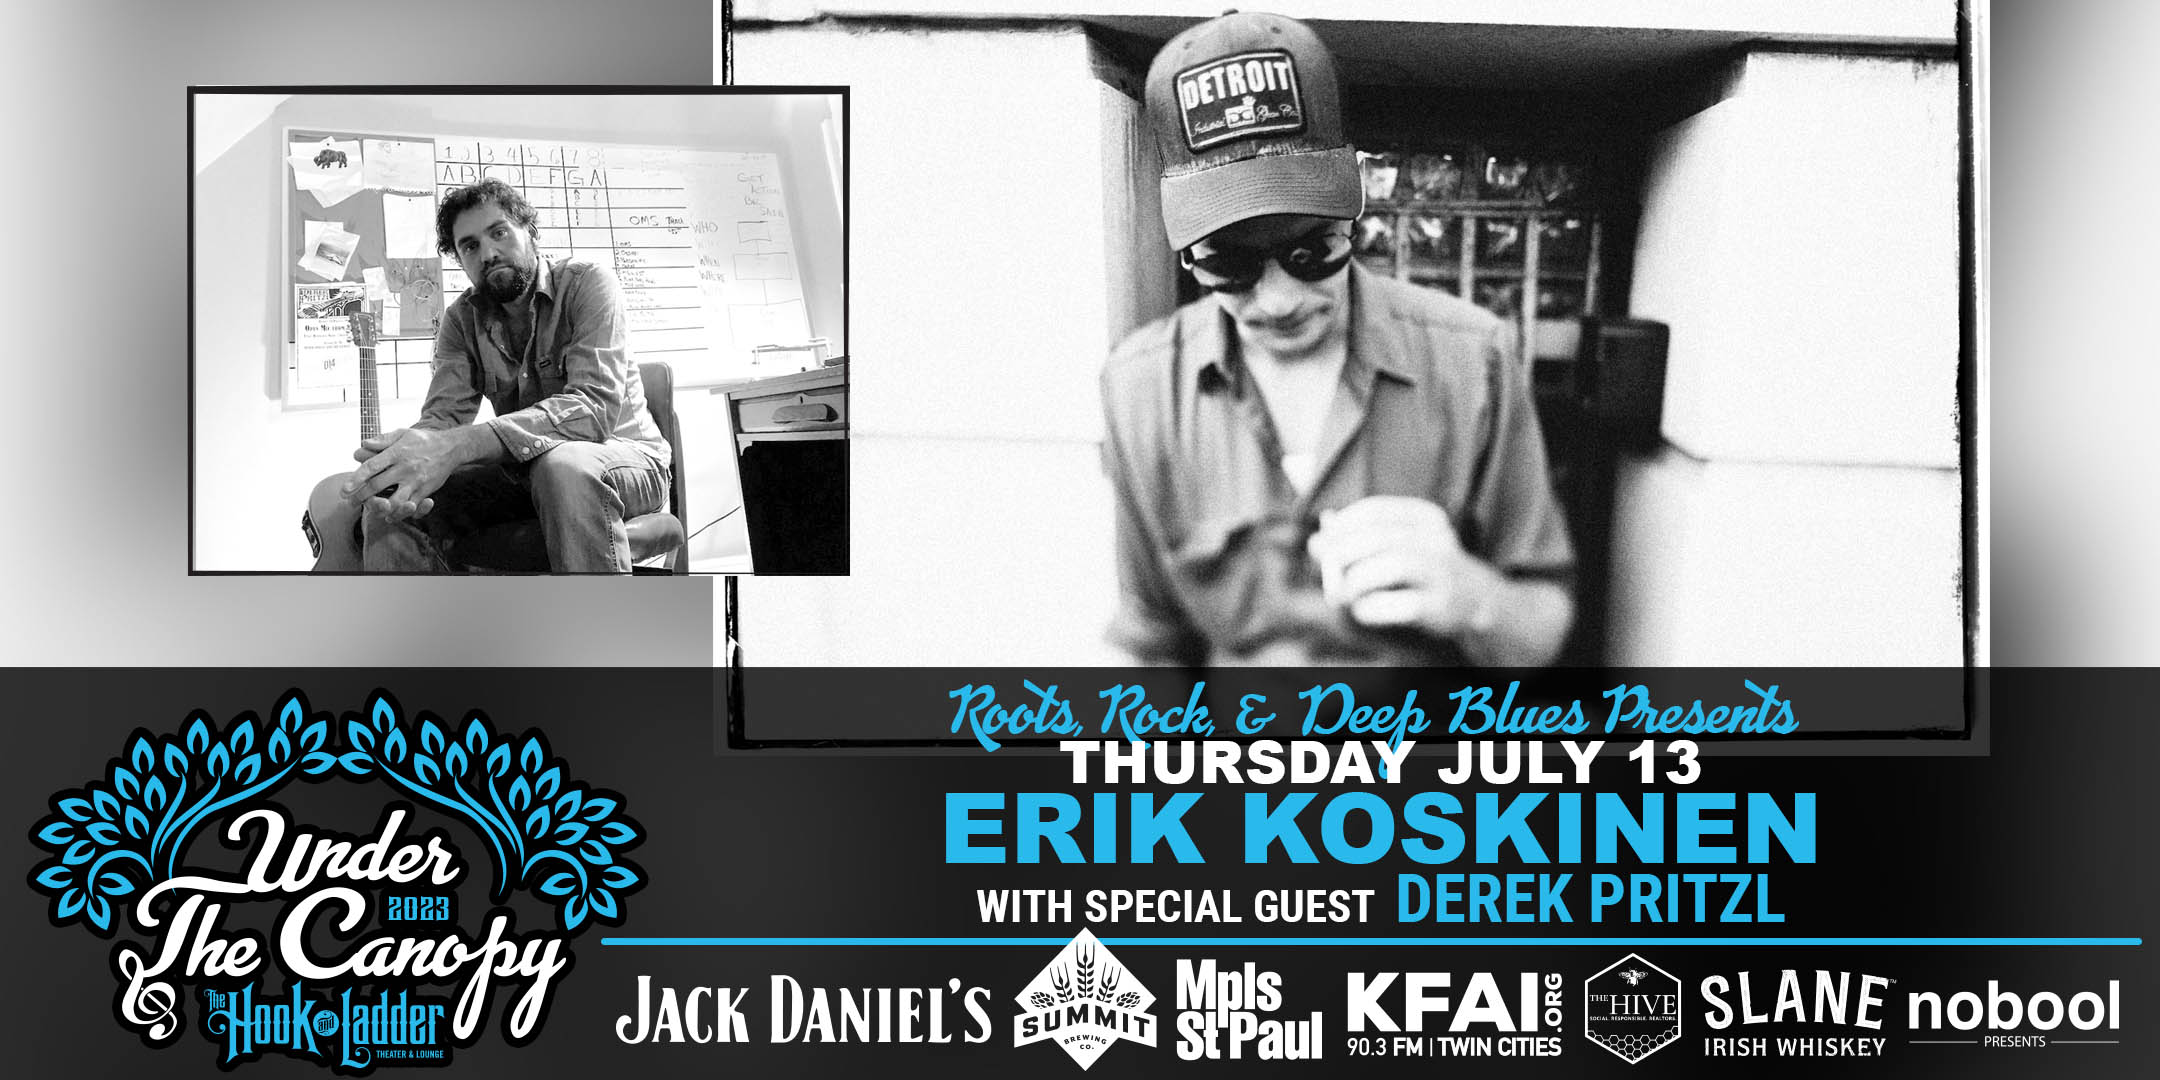 Roots, Rock, & Deep Blues Presents Erik Koskinen with special guest Derek Pritzl Thursday, July 13, 2023 Under The Canopy at The Hook and Ladder Theater "An Urban Outdoor Summer Concert Series" Doors 6:00pm :: Music 7:00pm :: 21+ Reserved Seats: $30 GA: $20 ADV / $25 DOS * Does Not Include Fees